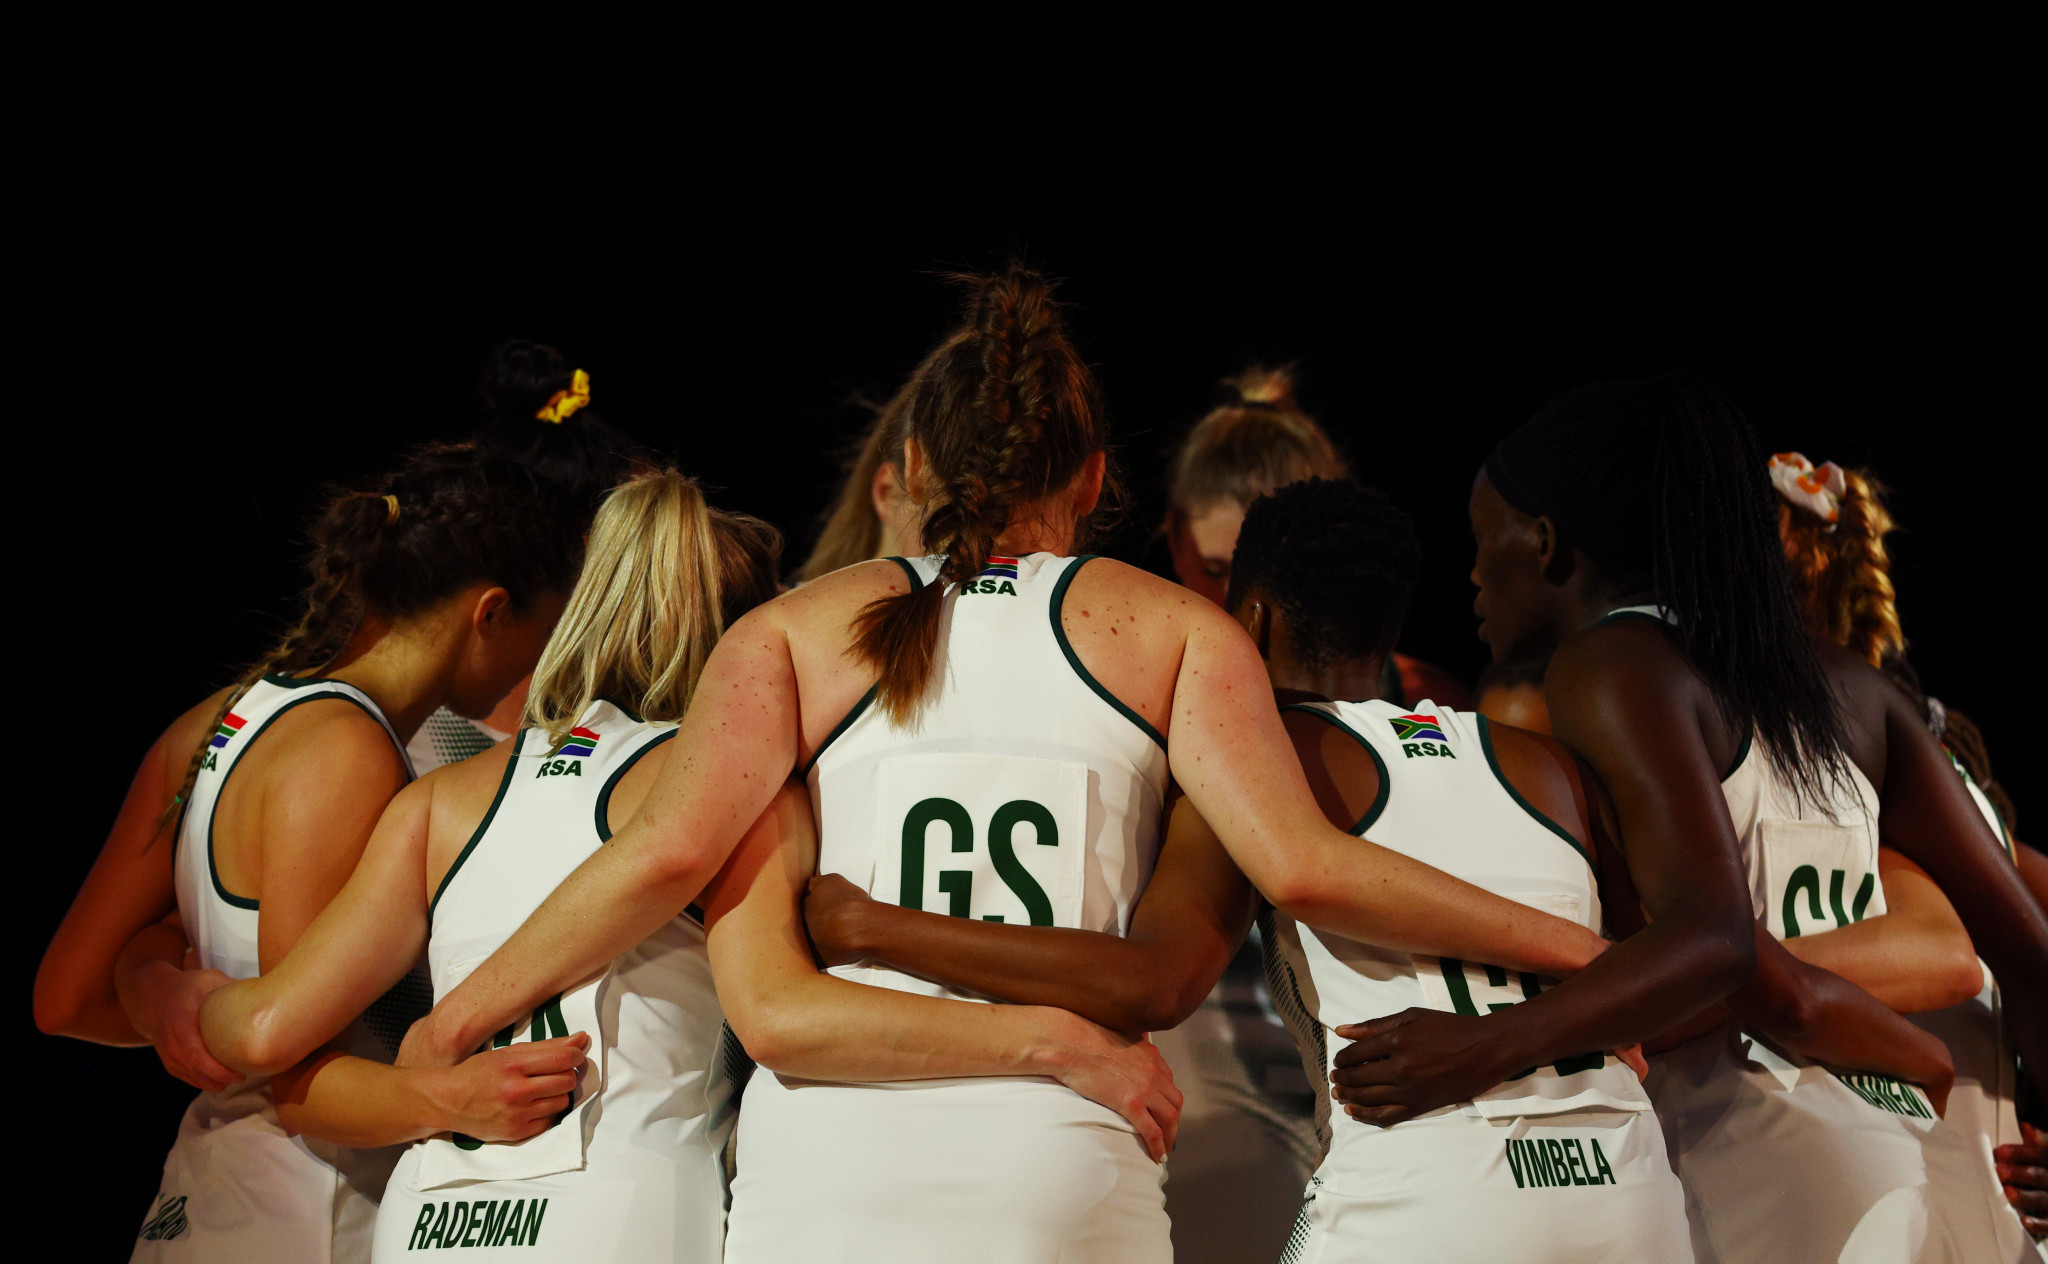 South Africa are to host the next edition of the Netball World Cup ©Getty Images